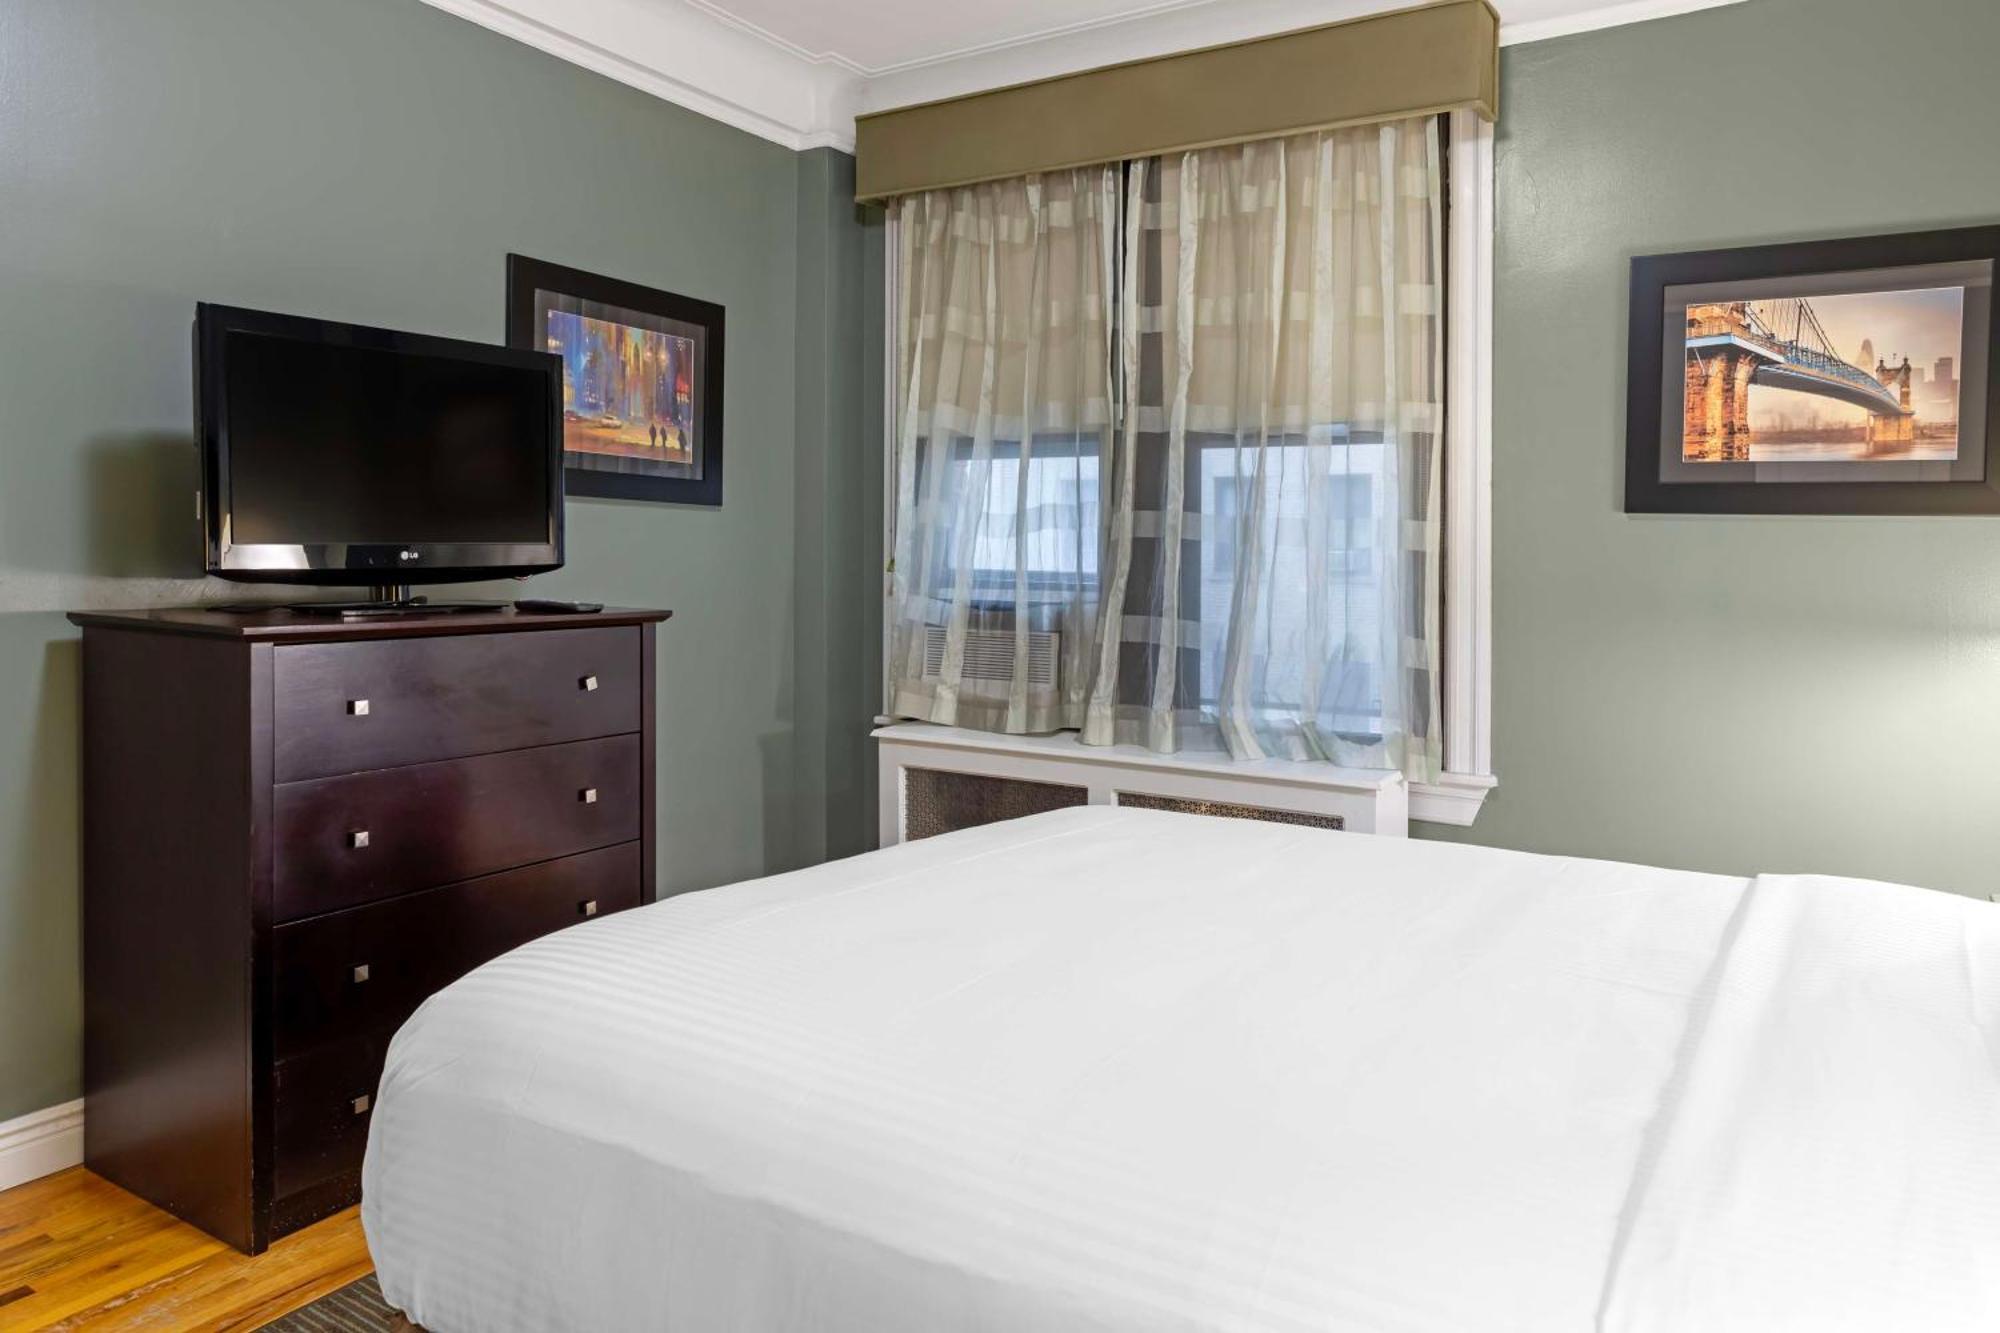 Best Western Plus Hospitality House Suites New York Esterno foto